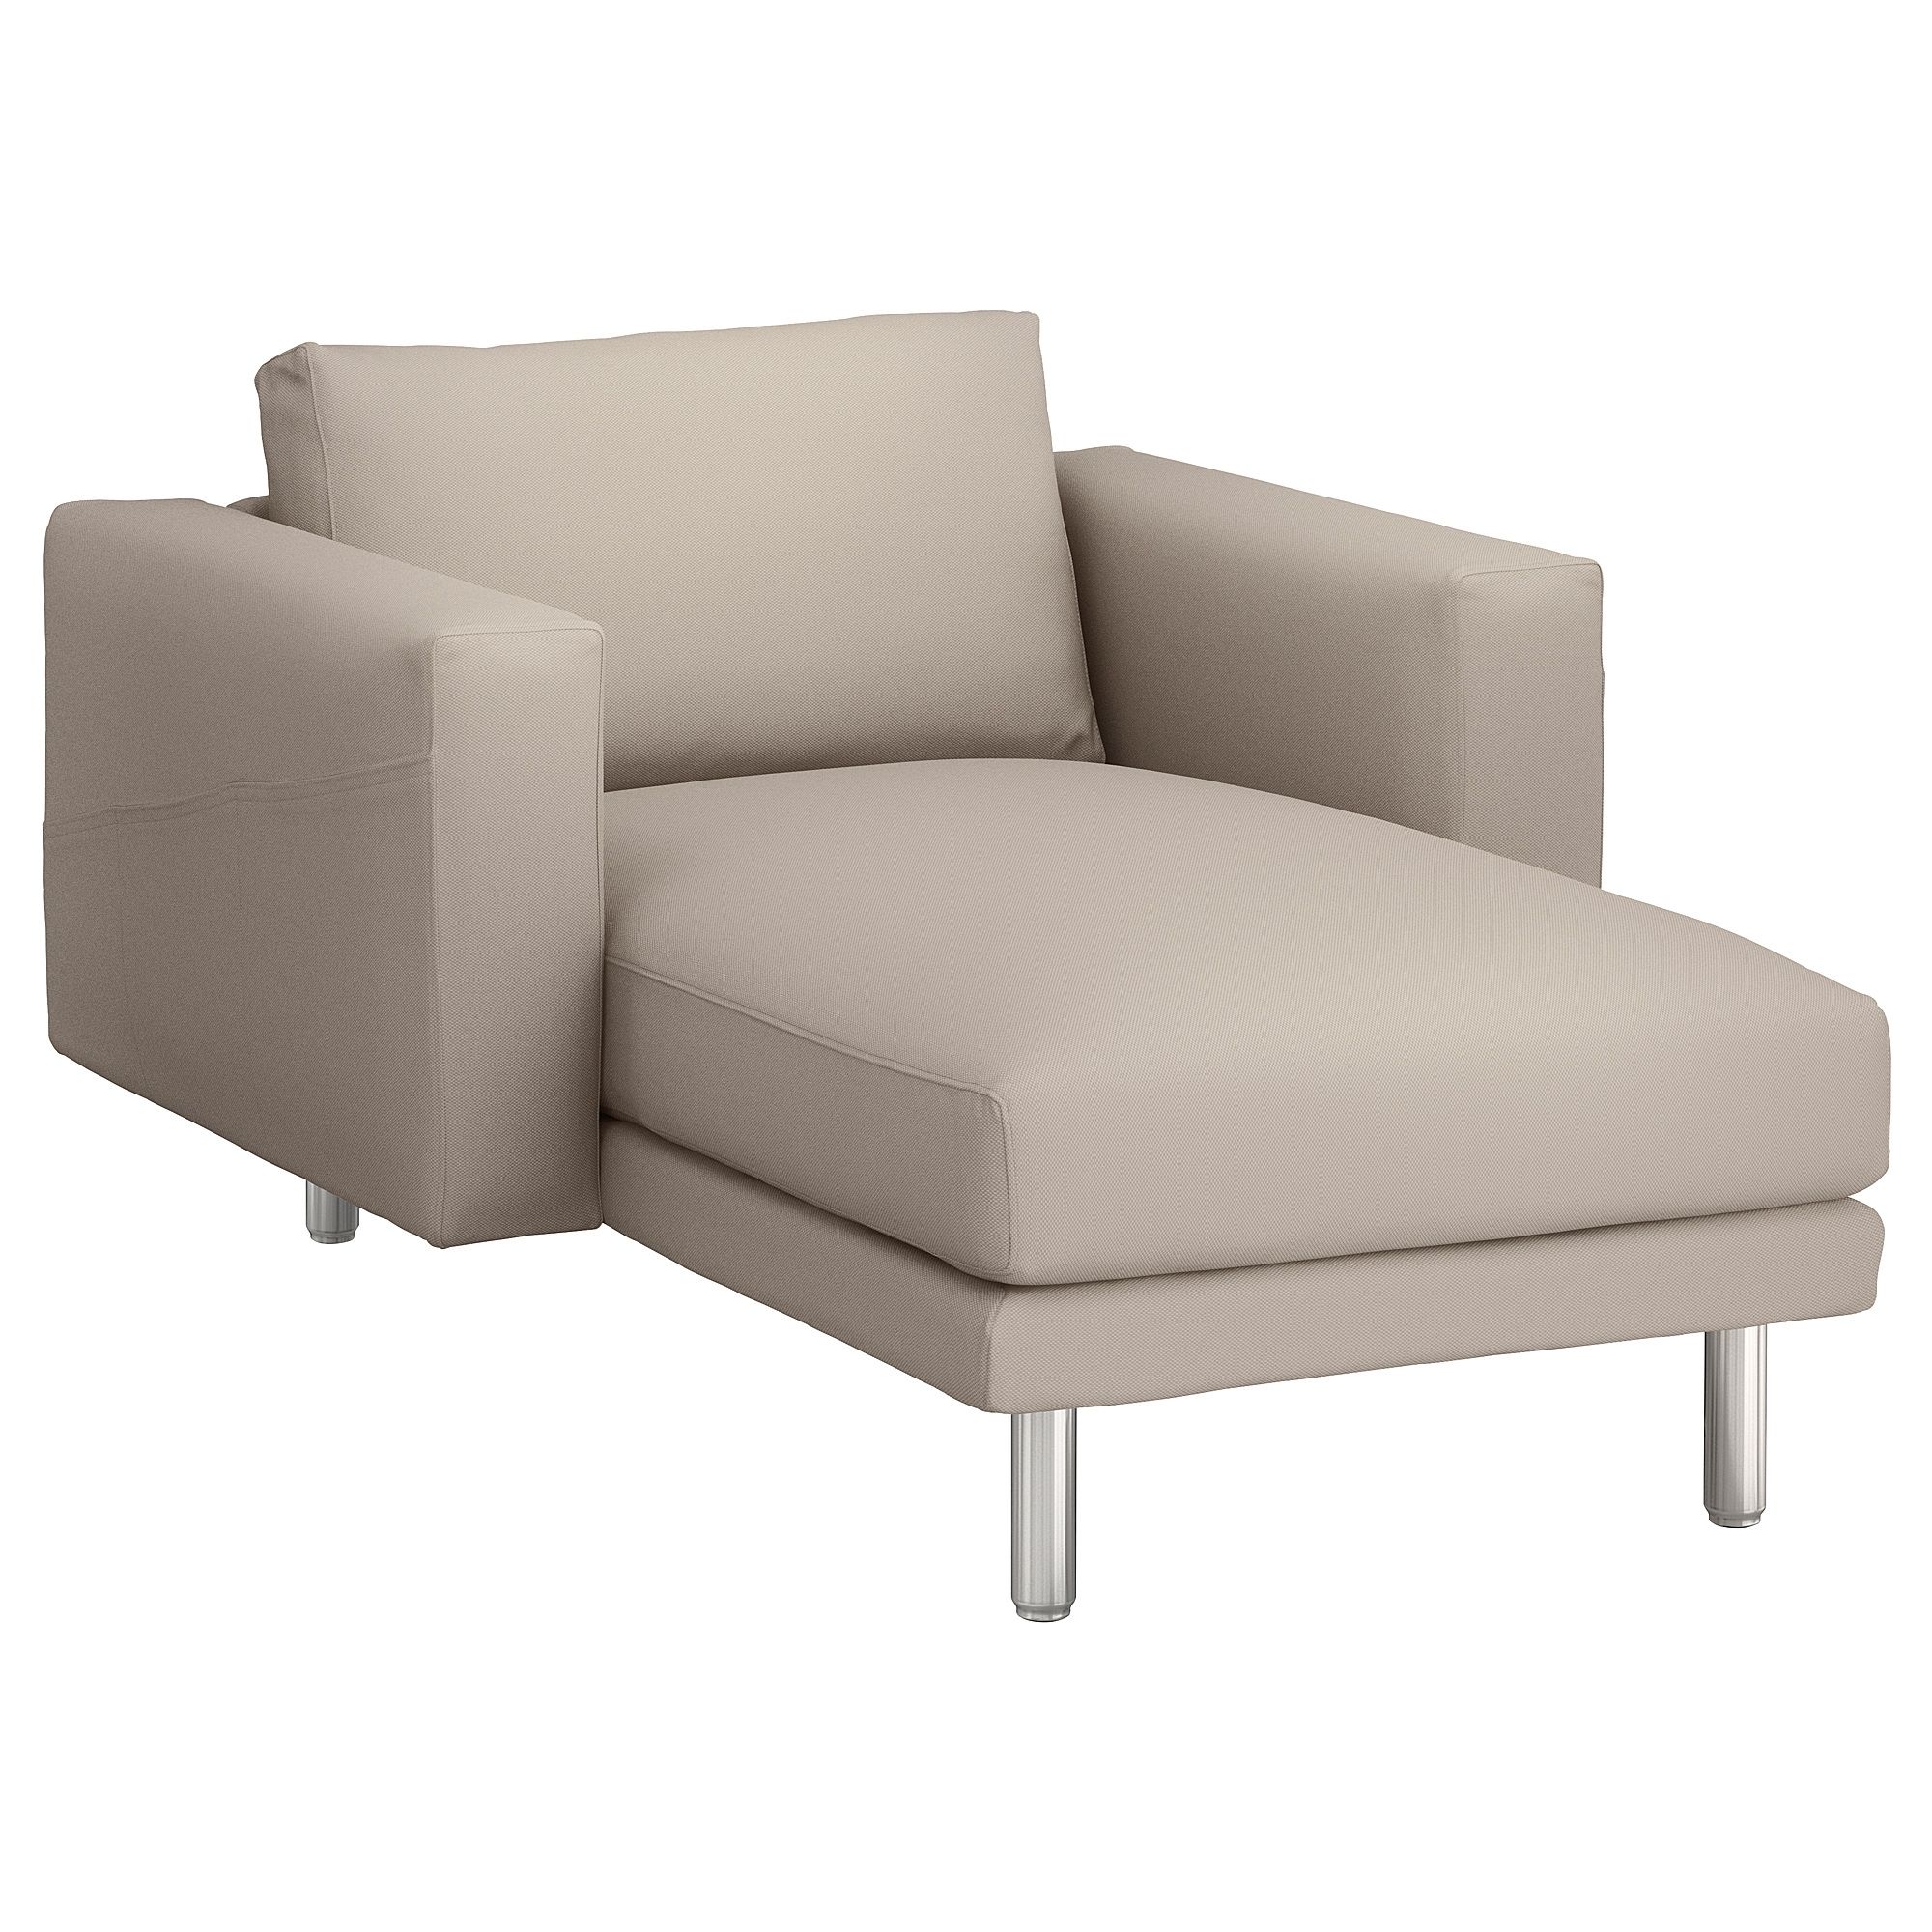 Ikea Chaise Lounges In Favorite Chaise Lounges (View 7 of 15)